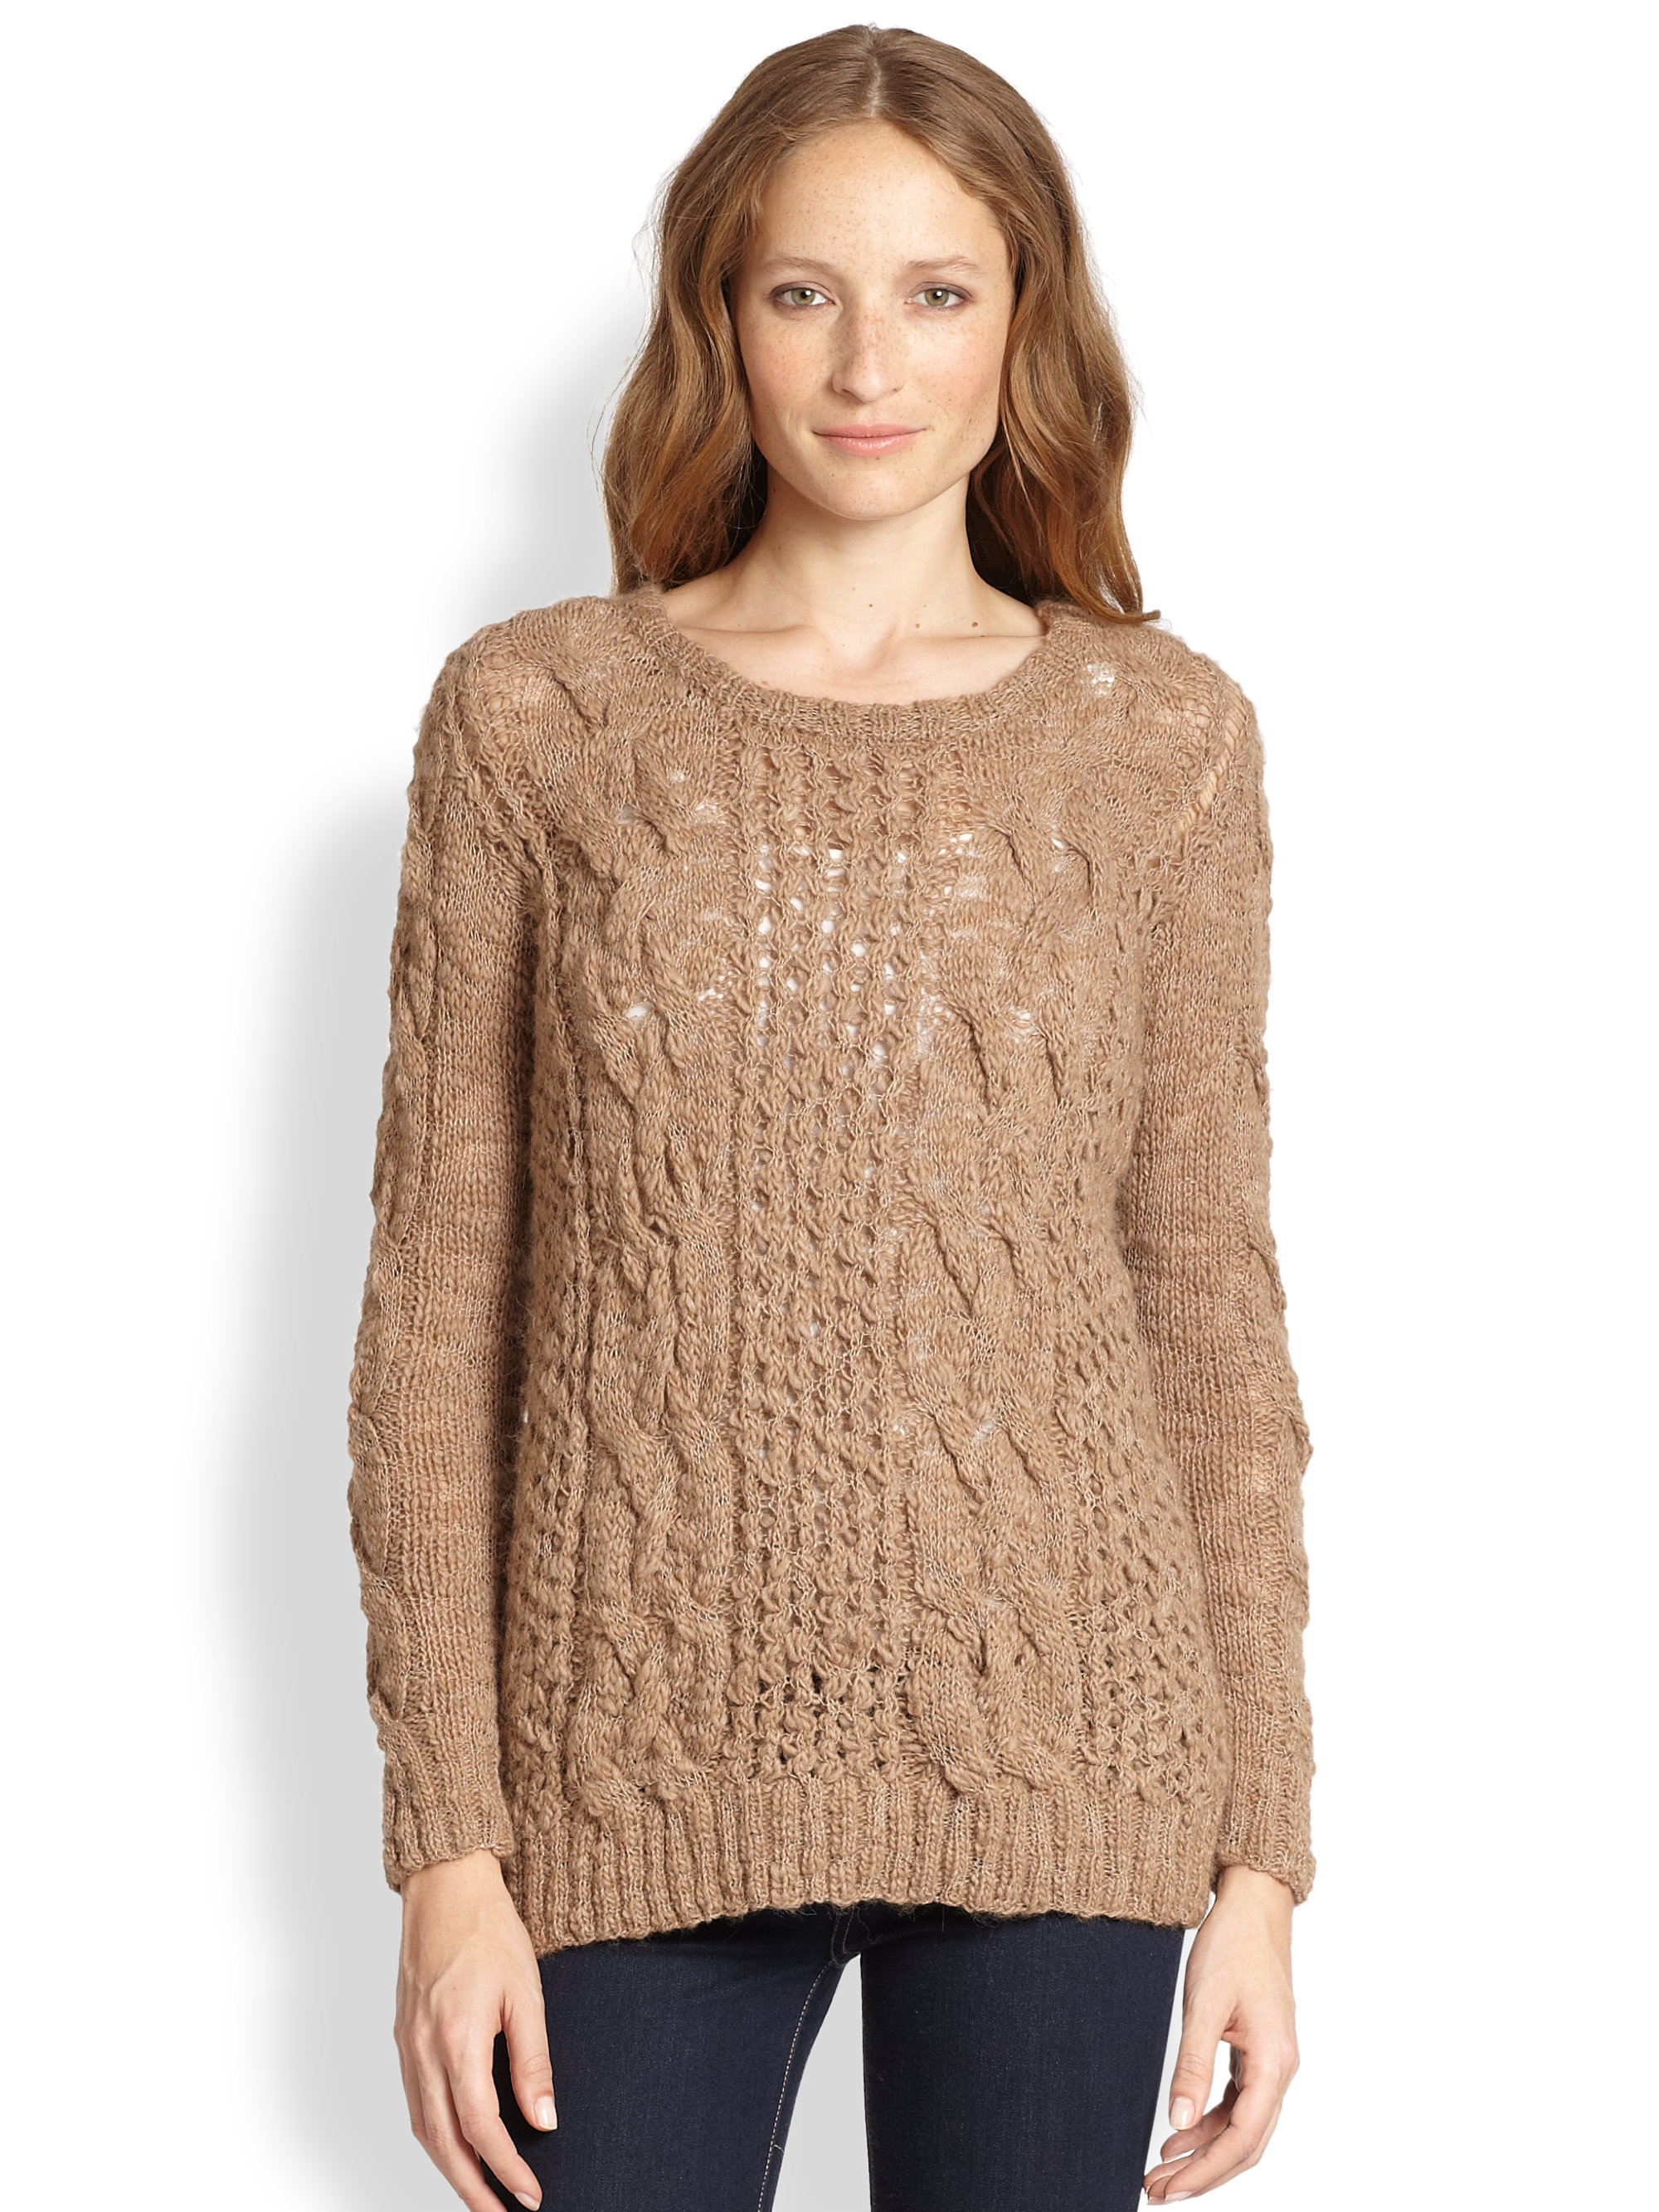 Augden Open-Weave & Cable-Knit Sweater in Brown (CAMEL) | Lyst